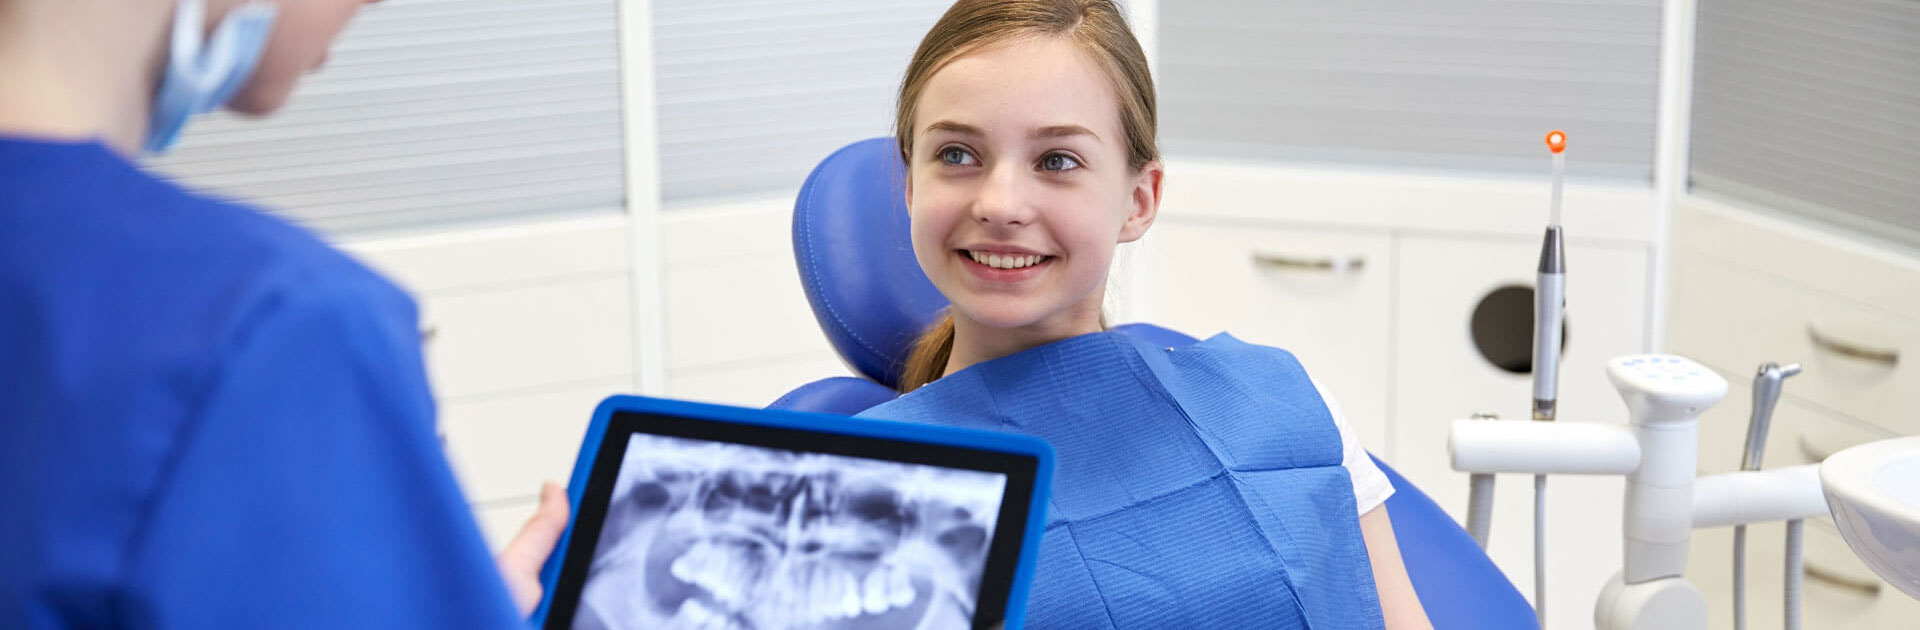 Dentist with teeth x-ray on tablet pc computer